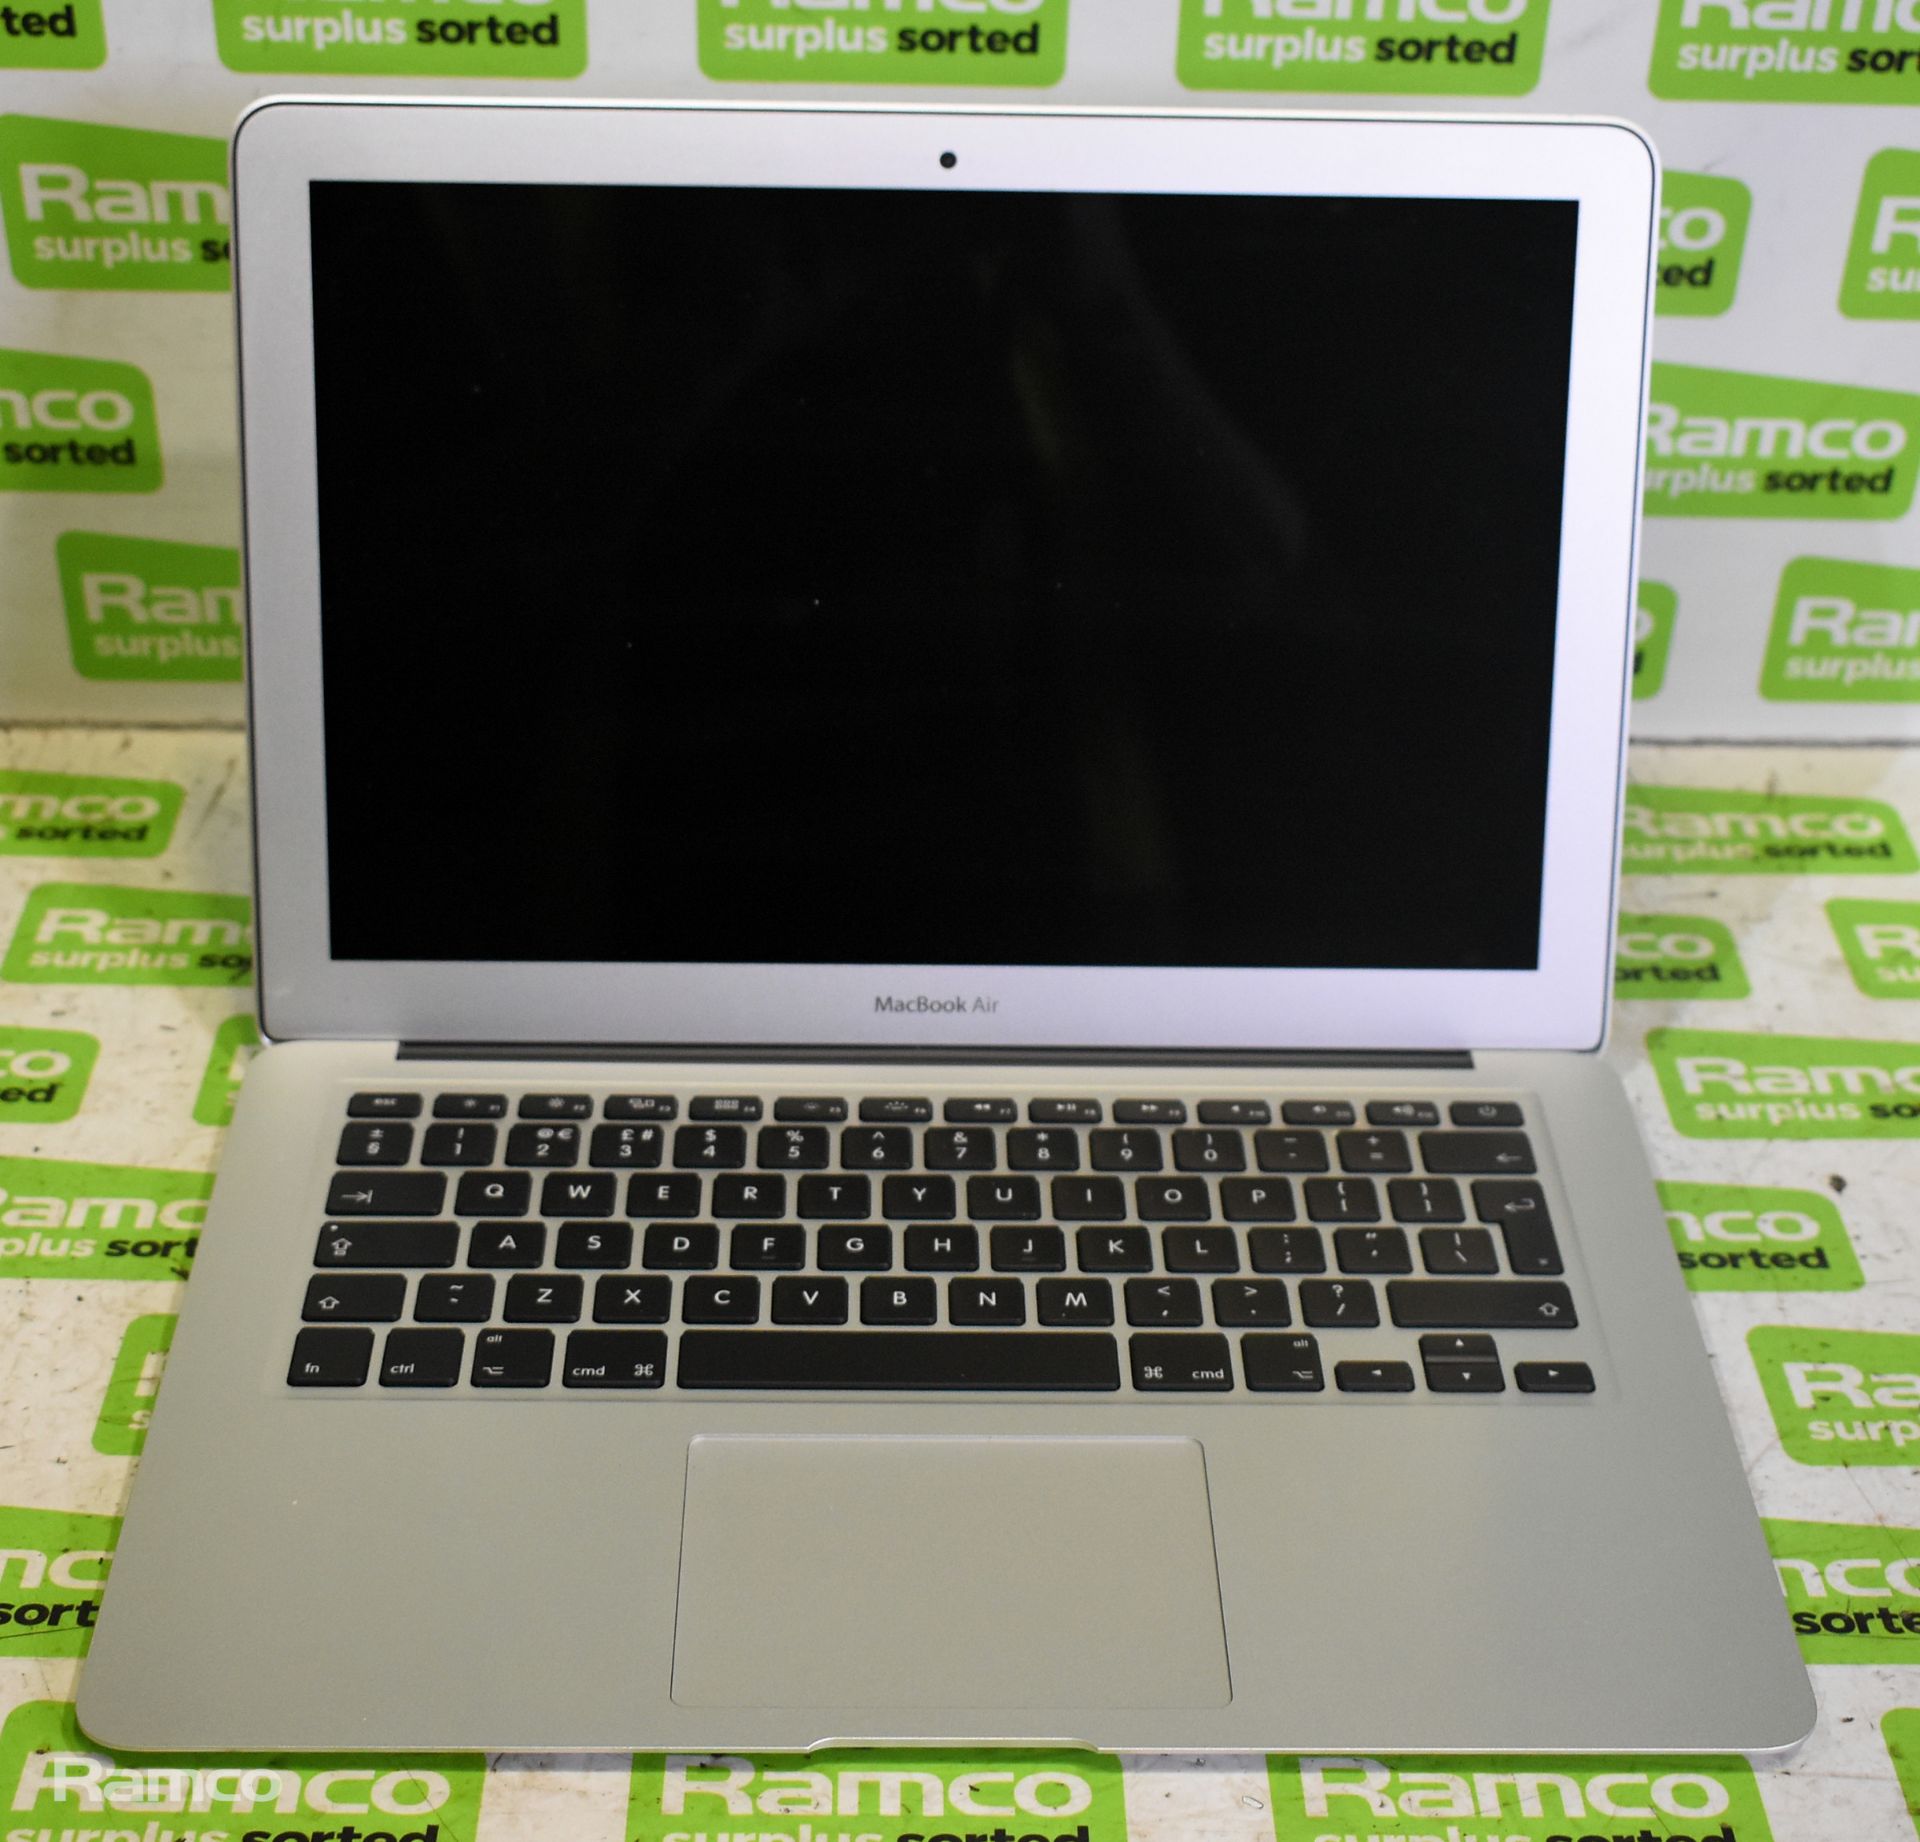 3x Apple Macbook Airs - 13 inch - A1466 - 2014 - full details in desc. - Image 8 of 10